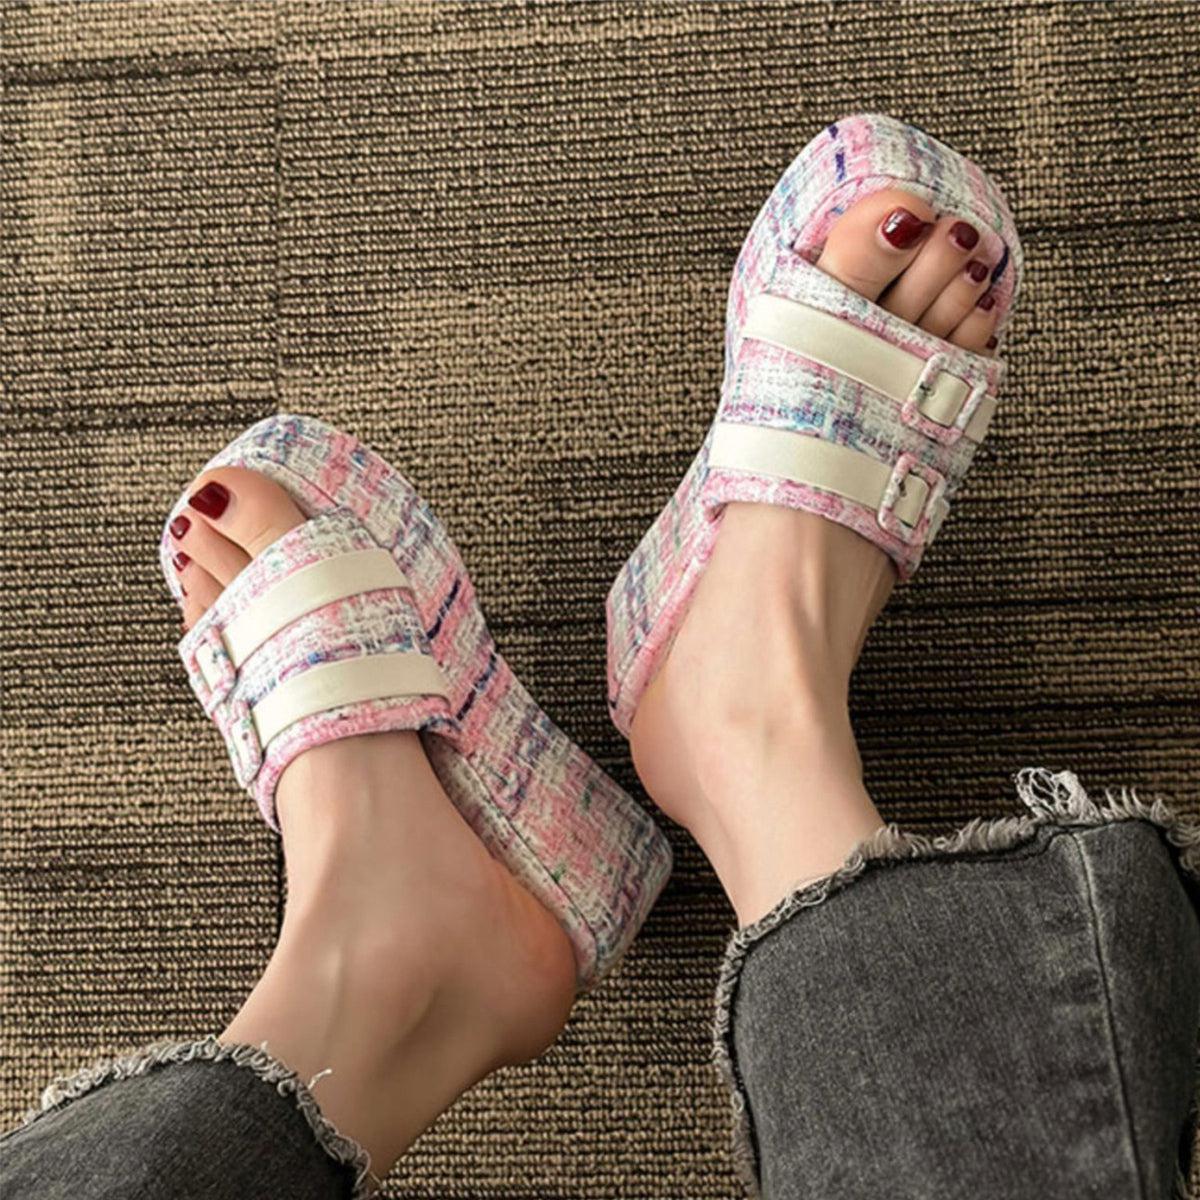 a woman's feet wearing a pair of sandals